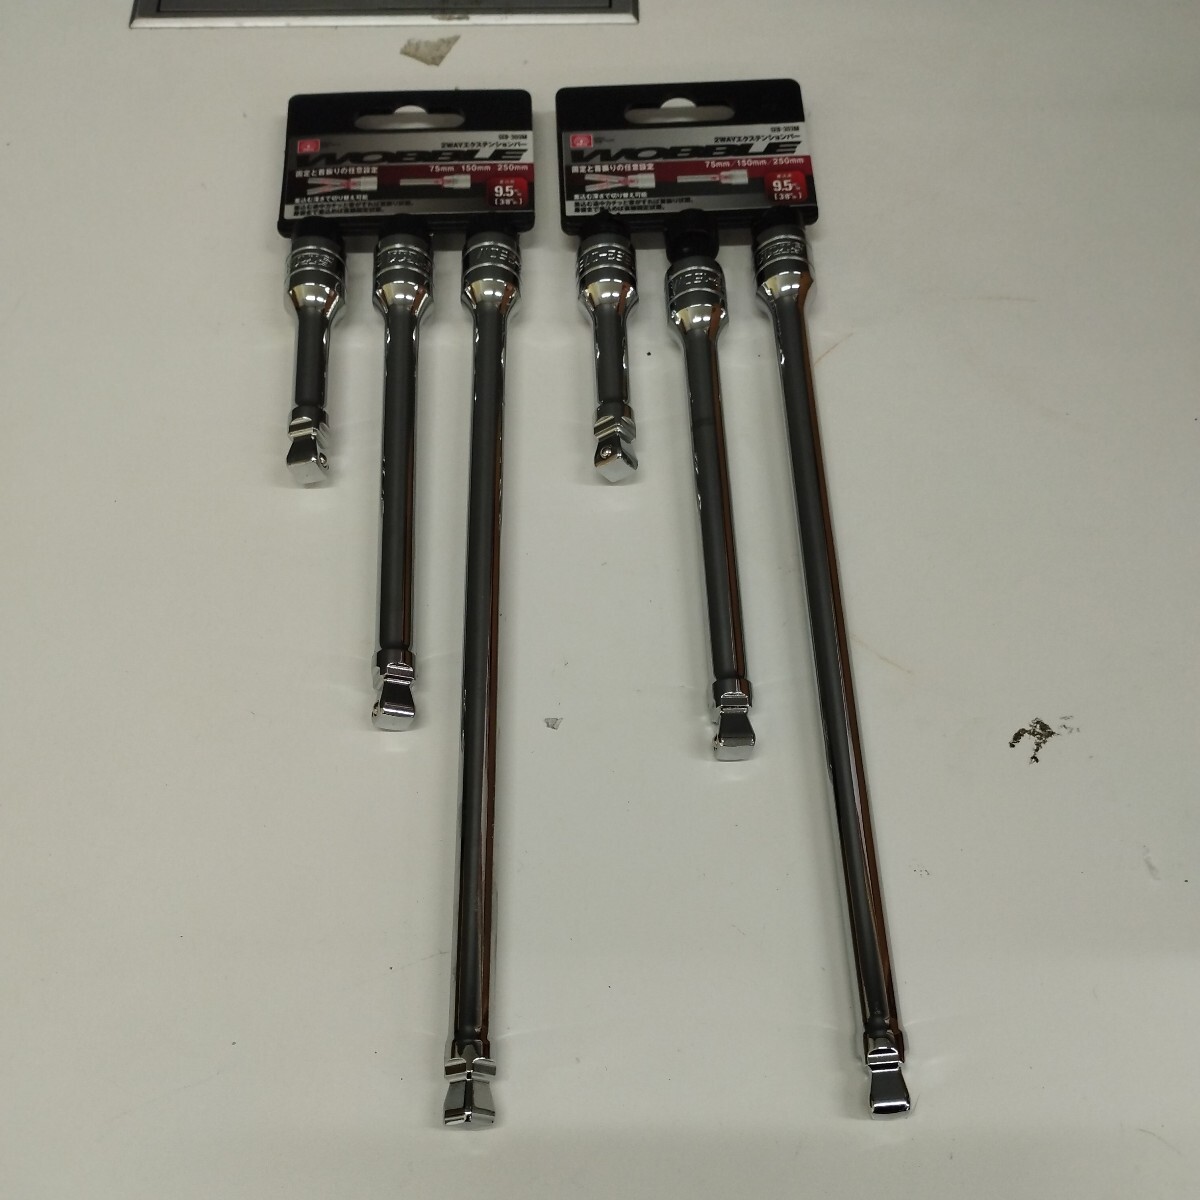 0605y0214 [2 set ]SK11 2WAY extension bar WOBBLE difference included angle 9.5mm×75*150*250mm SEB-303M total six pcs set 